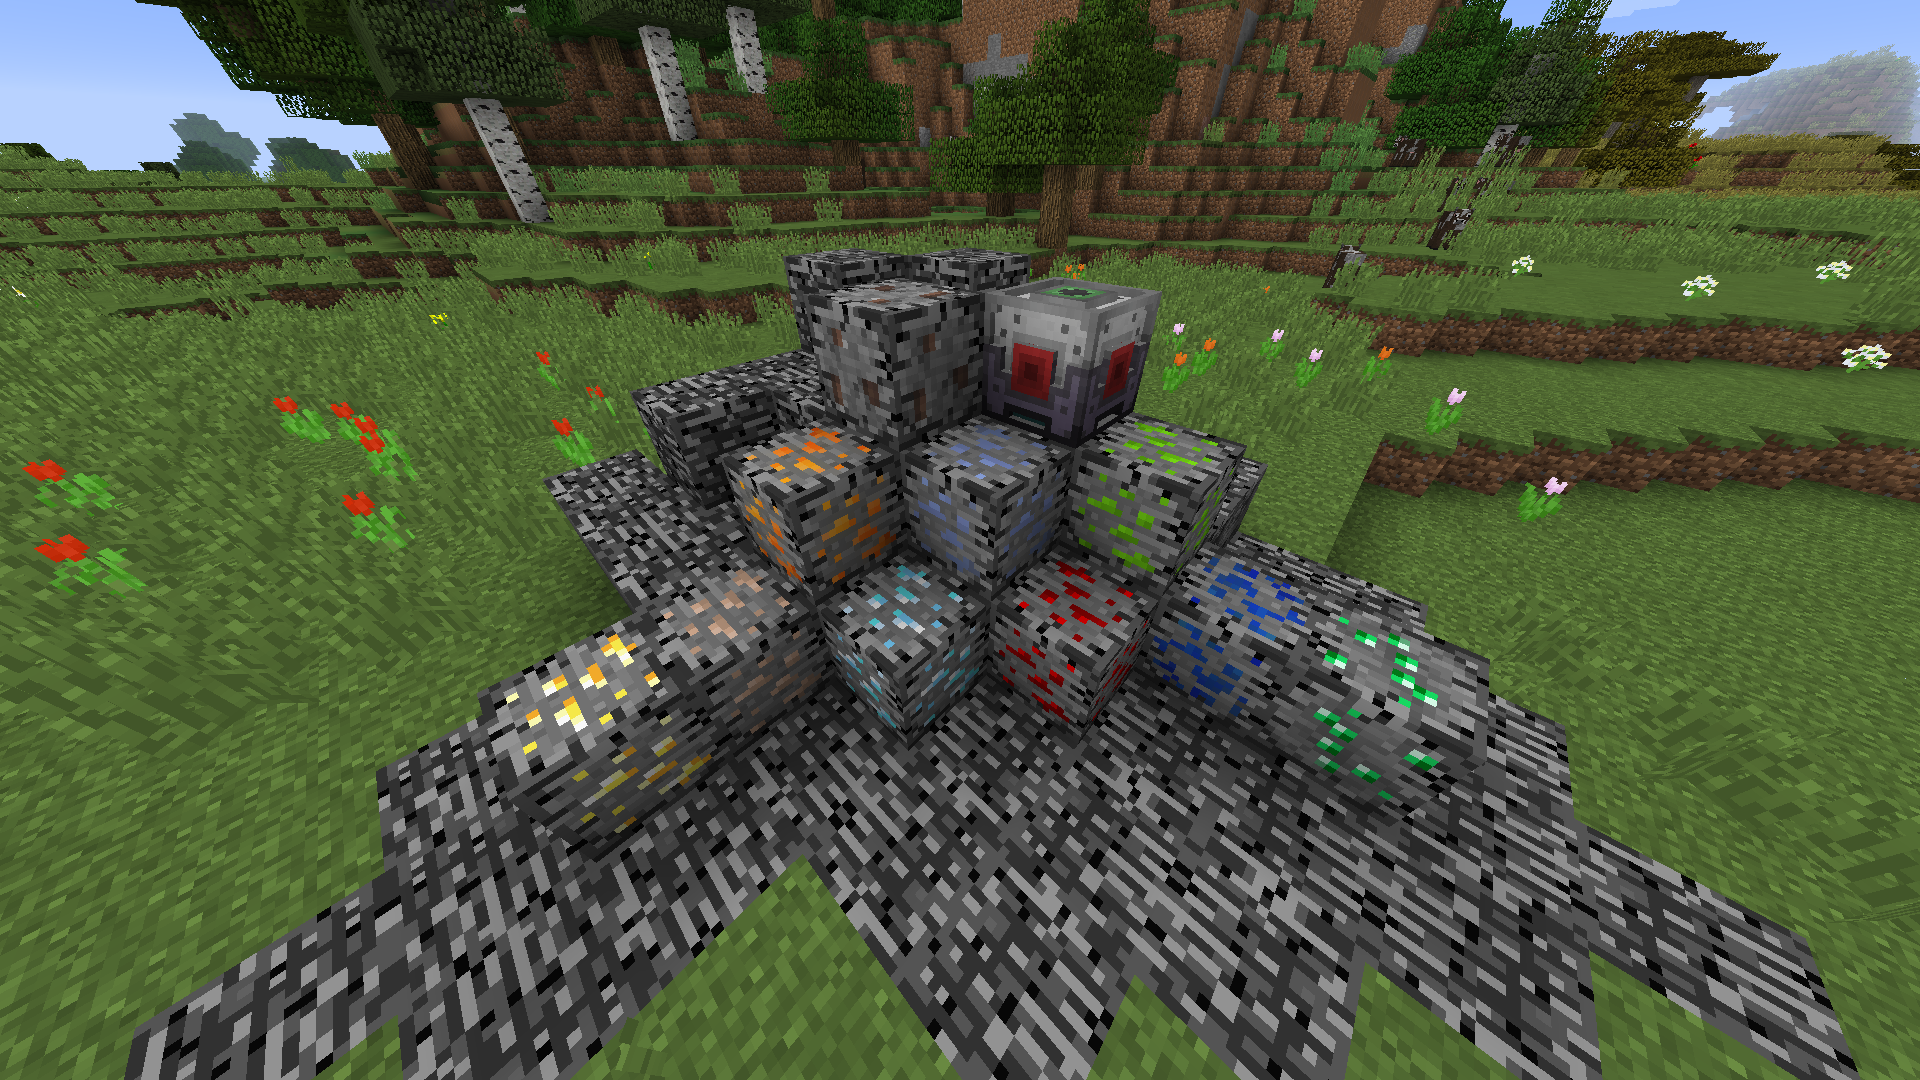 Collection of ores